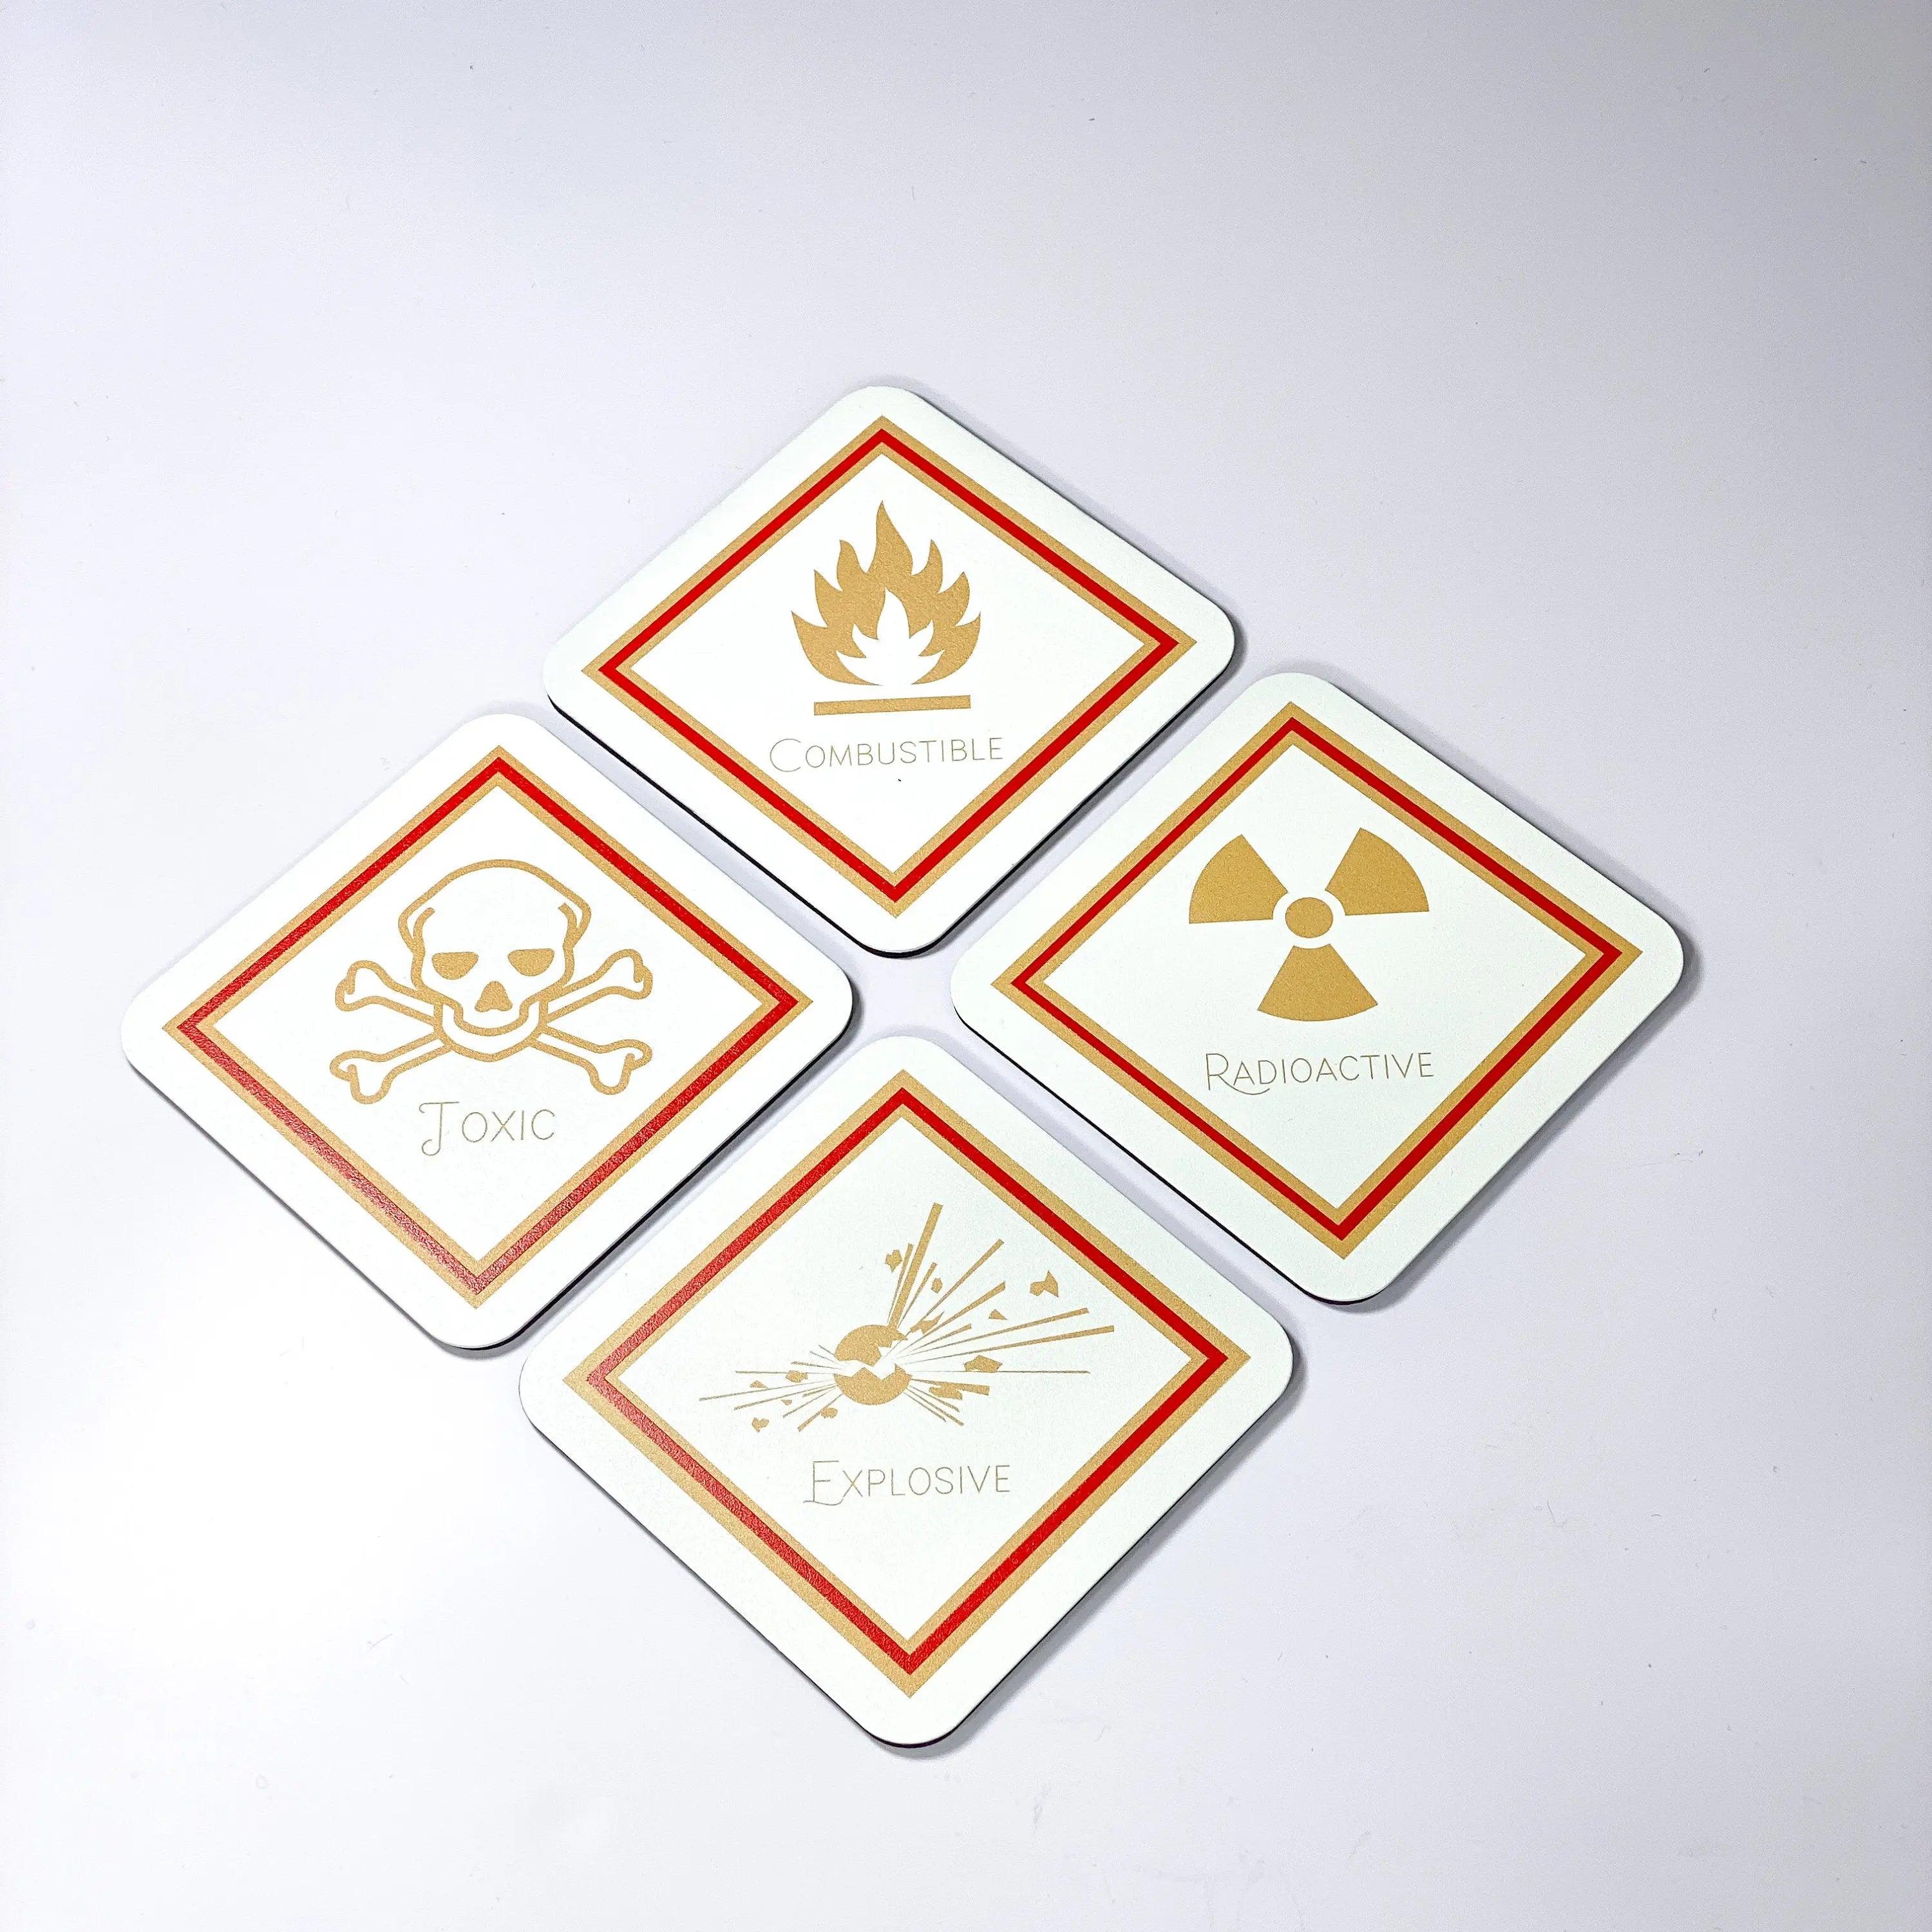 GHS Safety Label Metal Coaster Set | Health & Safety PPE | Engineering and Manufacturing Gift